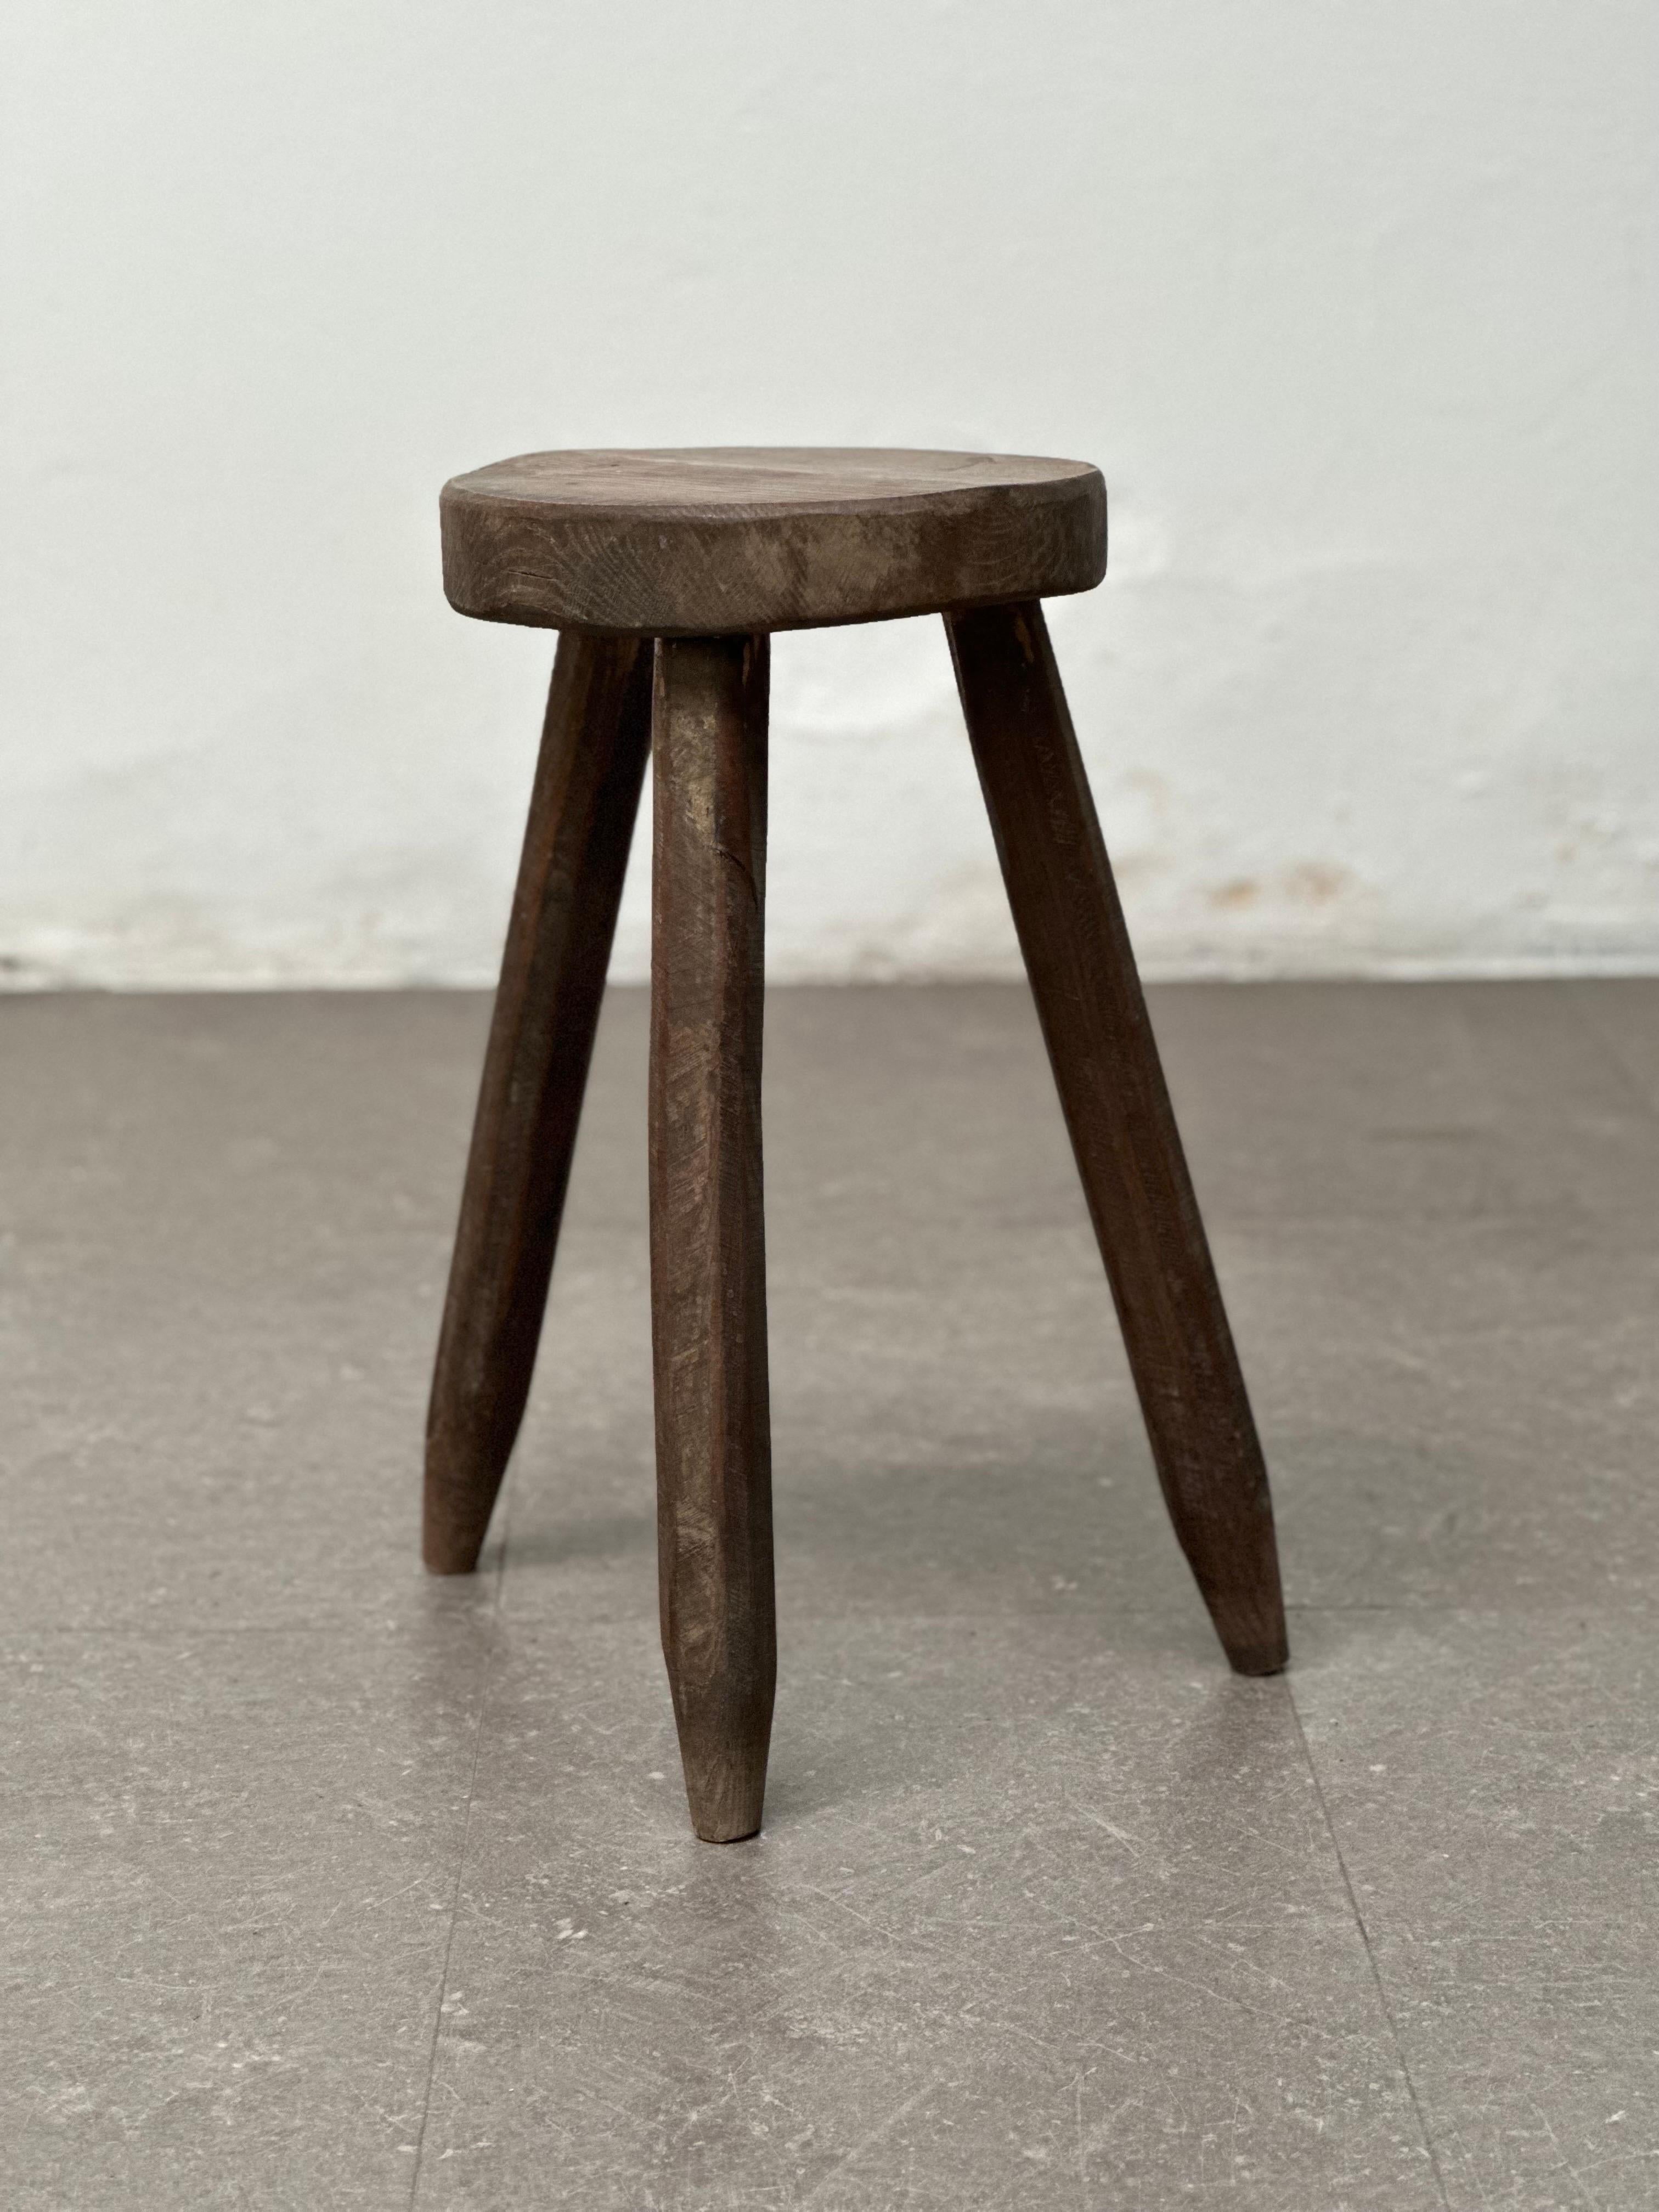 Mid-Century Modern French Brutalist Tripod Stool, 1960s - Embrace the Charm of Primitive Elegance